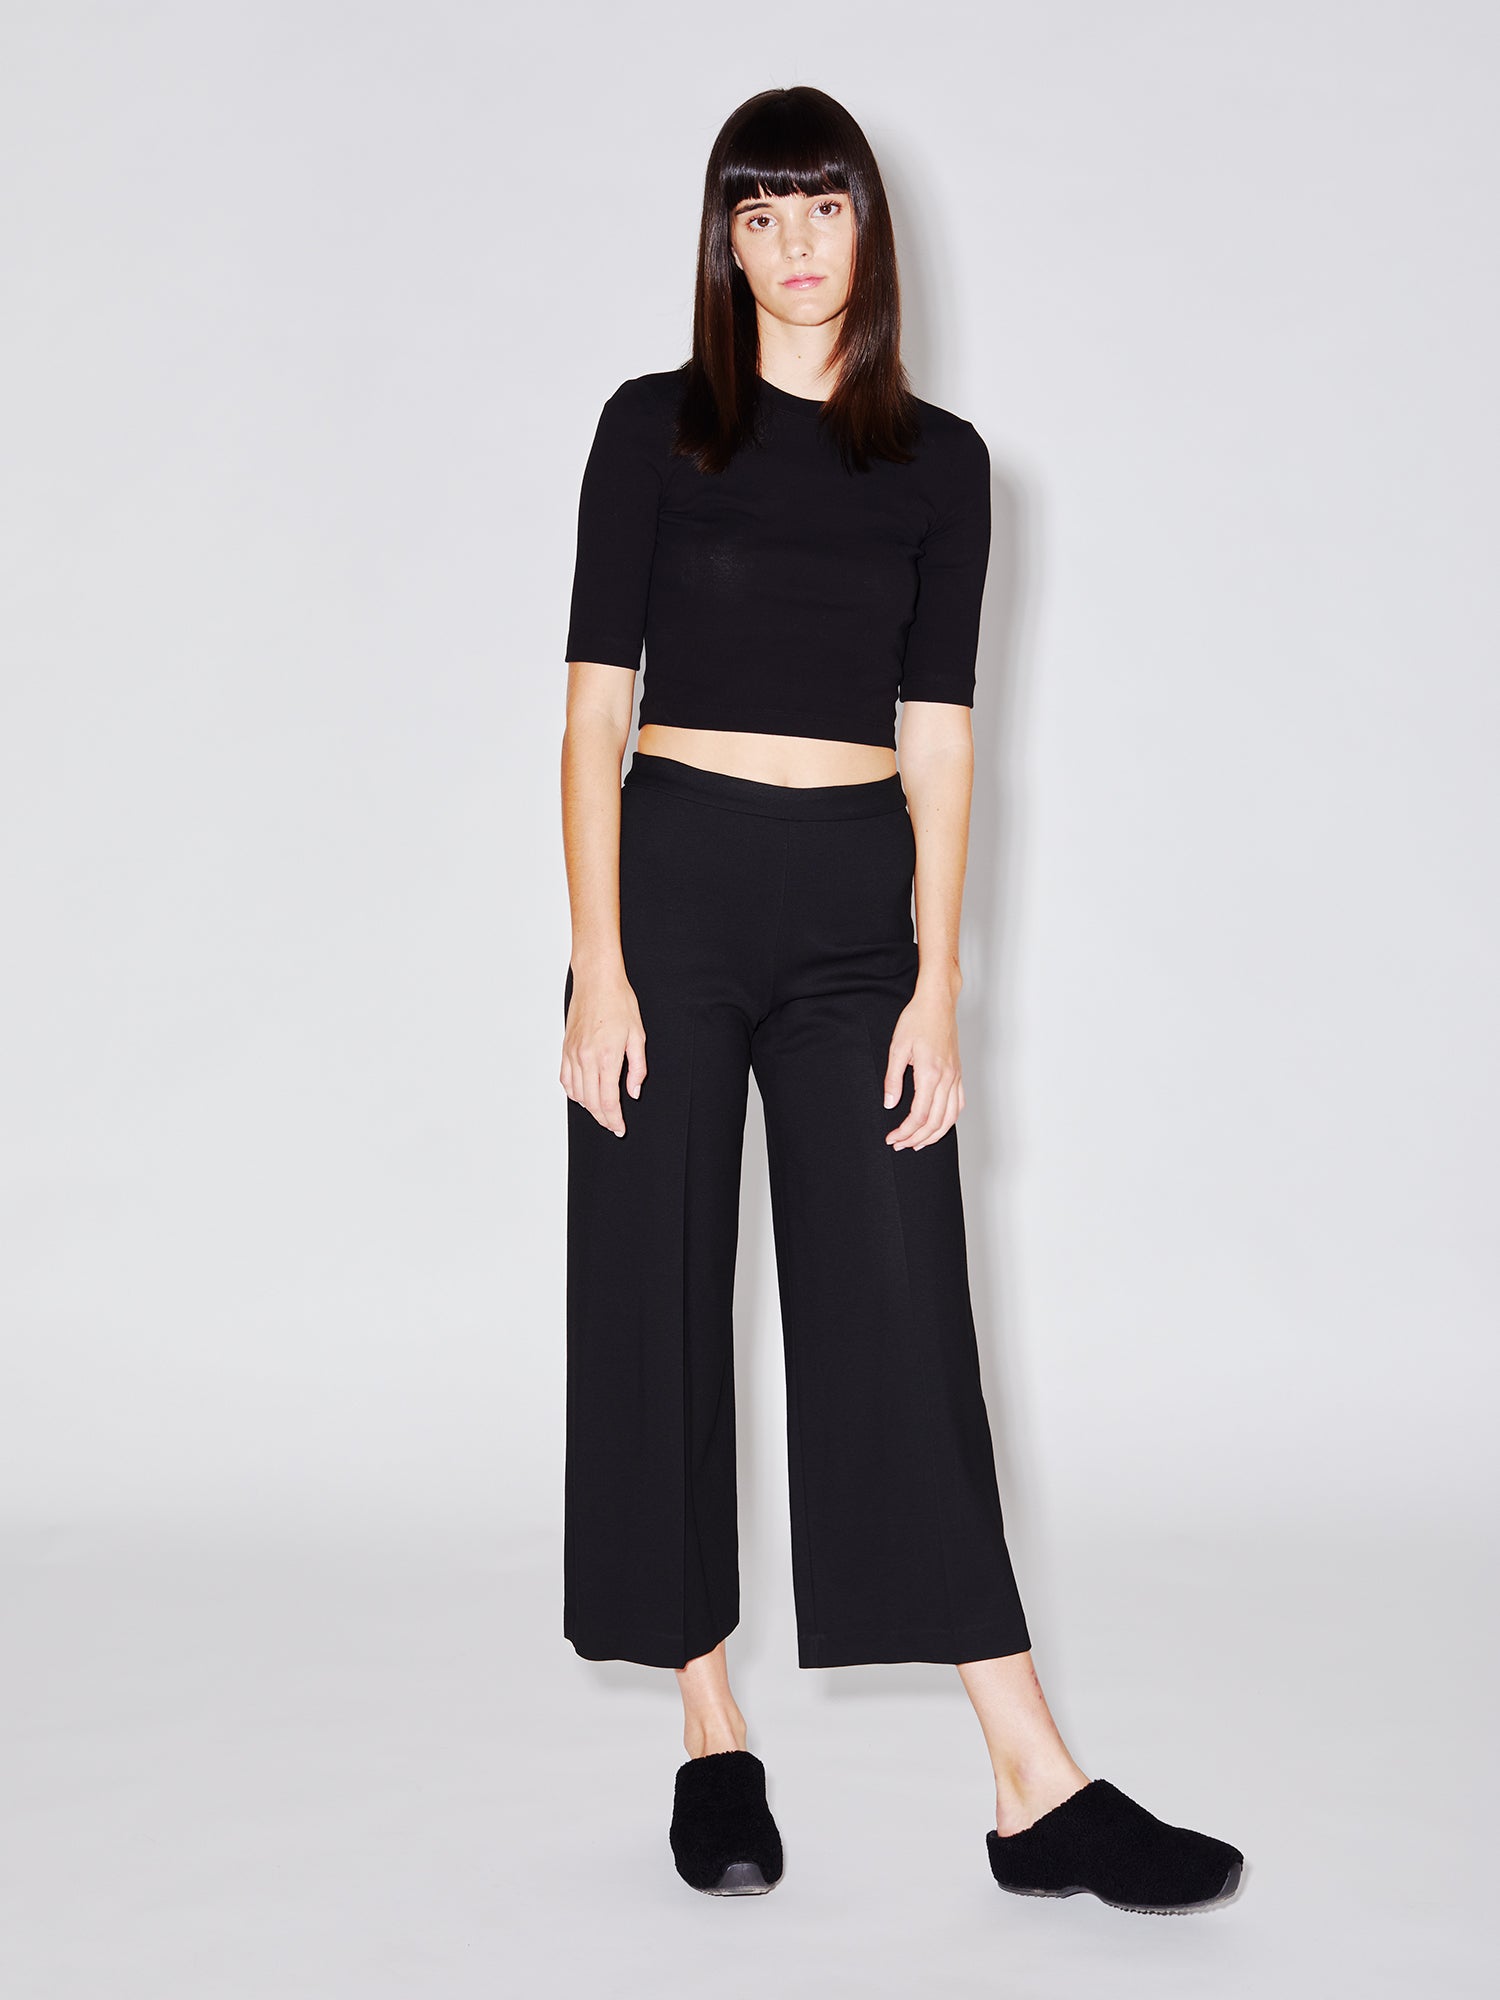 Buy Pink Straight Fit Trouser Pants Online - W for Woman